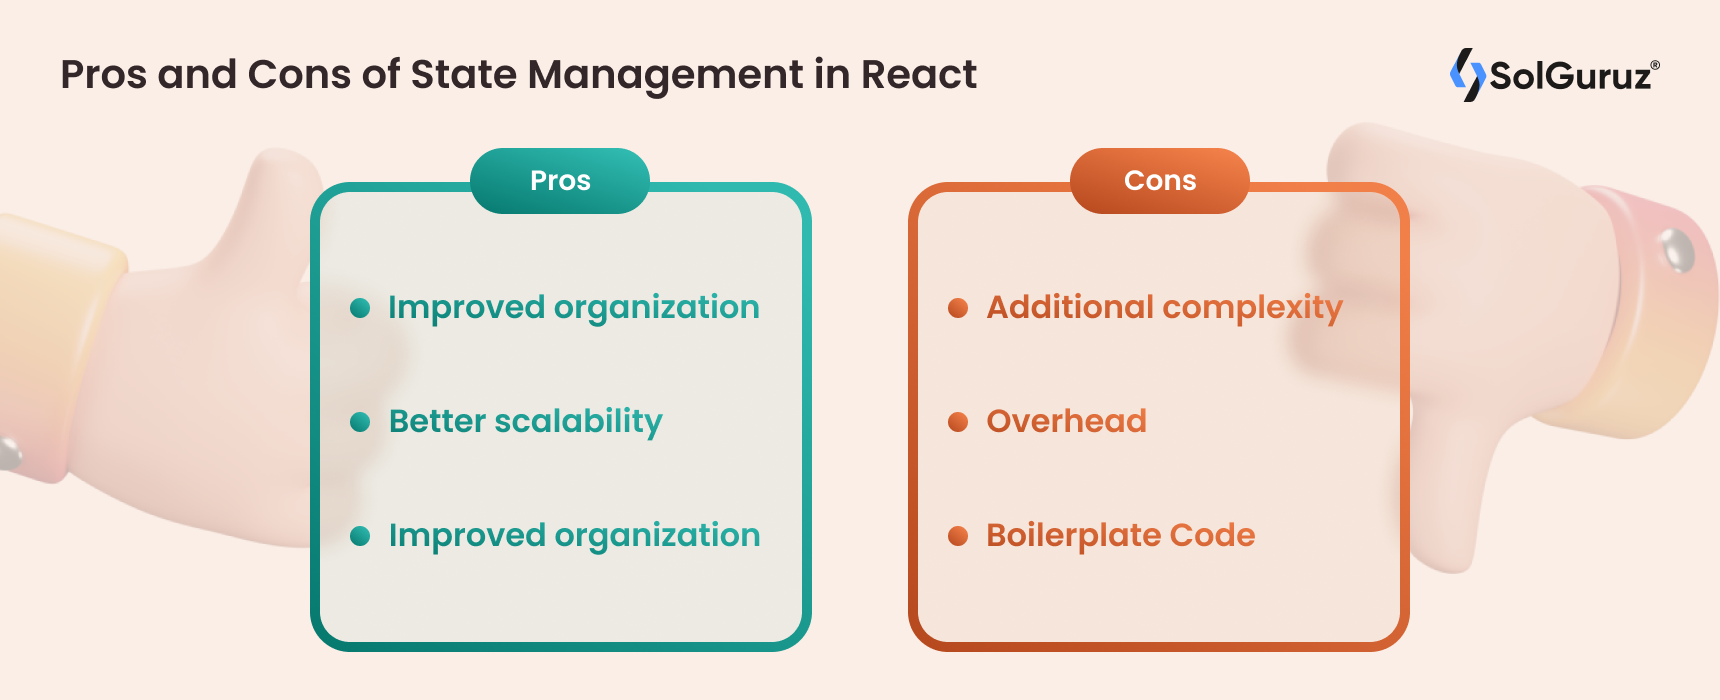 Pros and Cons of State Management in React